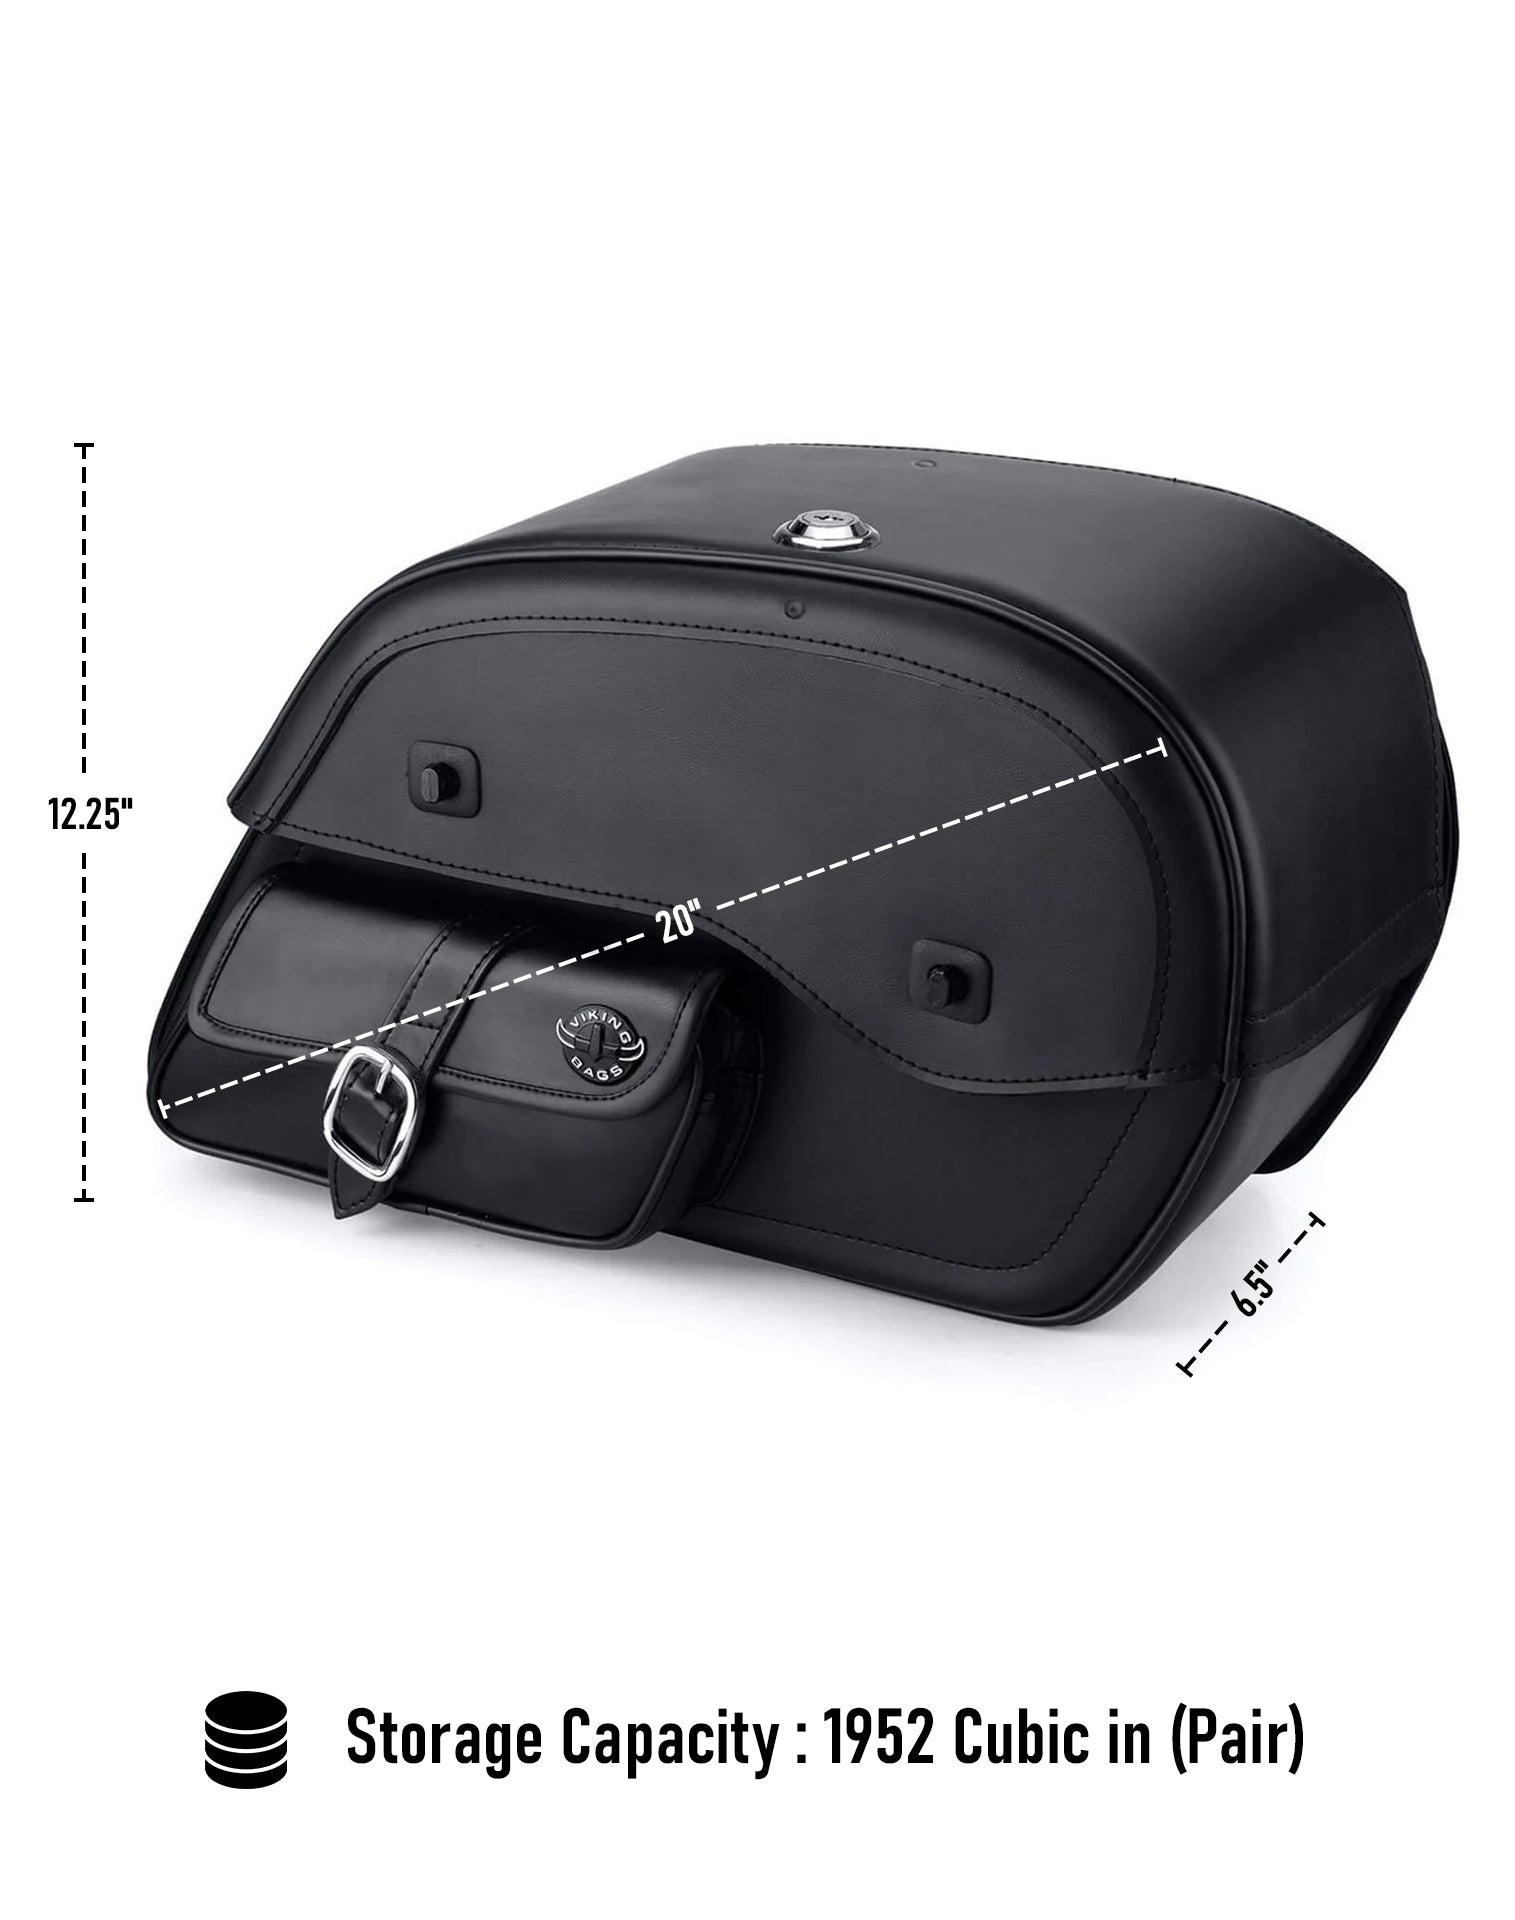 Viking Essential Side Pocket Large Yamaha Silverado Leather Motorcycle Saddlebags Can Store Your Ridings Gears